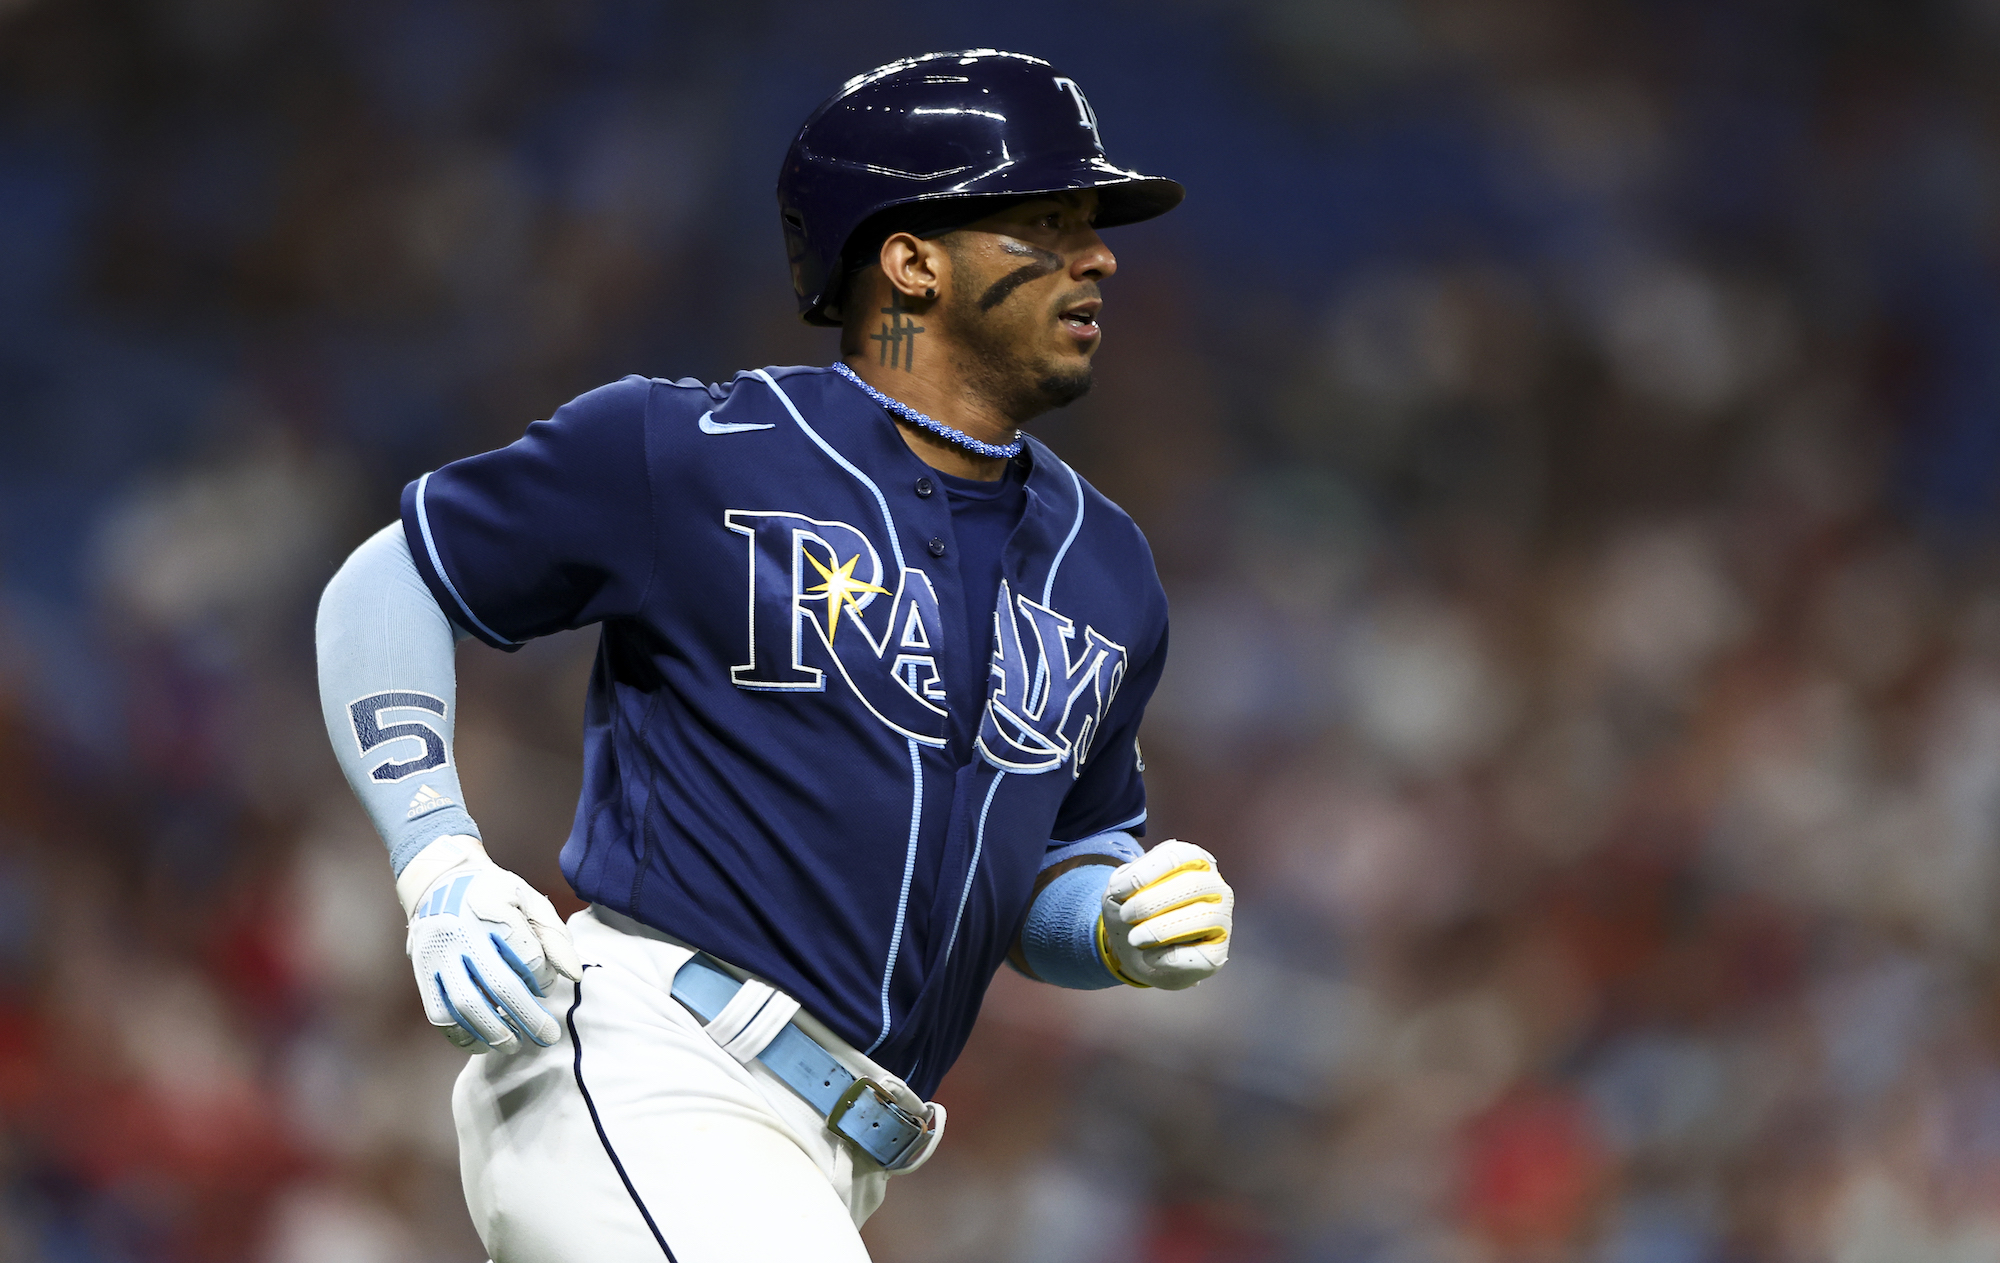 Rays Travel Without Wander Franco While MLB Investigates Allegations Of ...